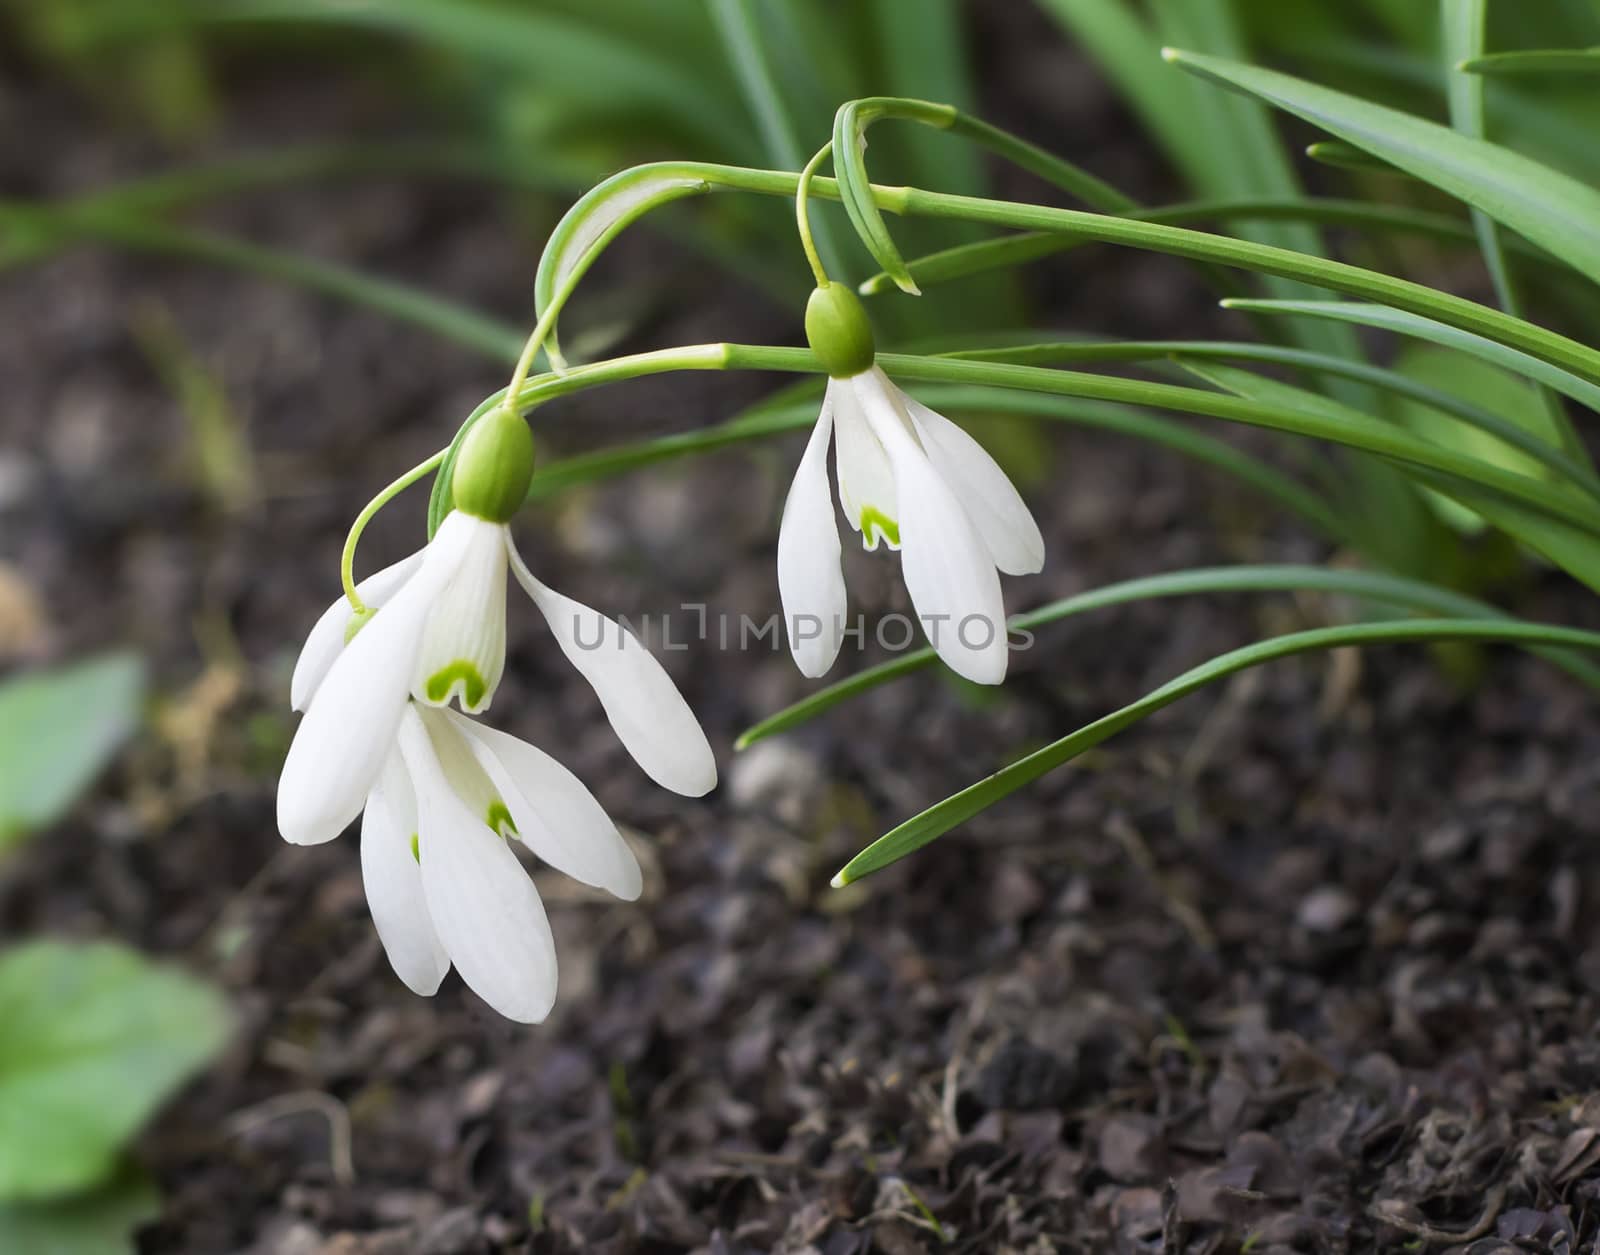 Snowdrops - the first spring flowers. by georgina198